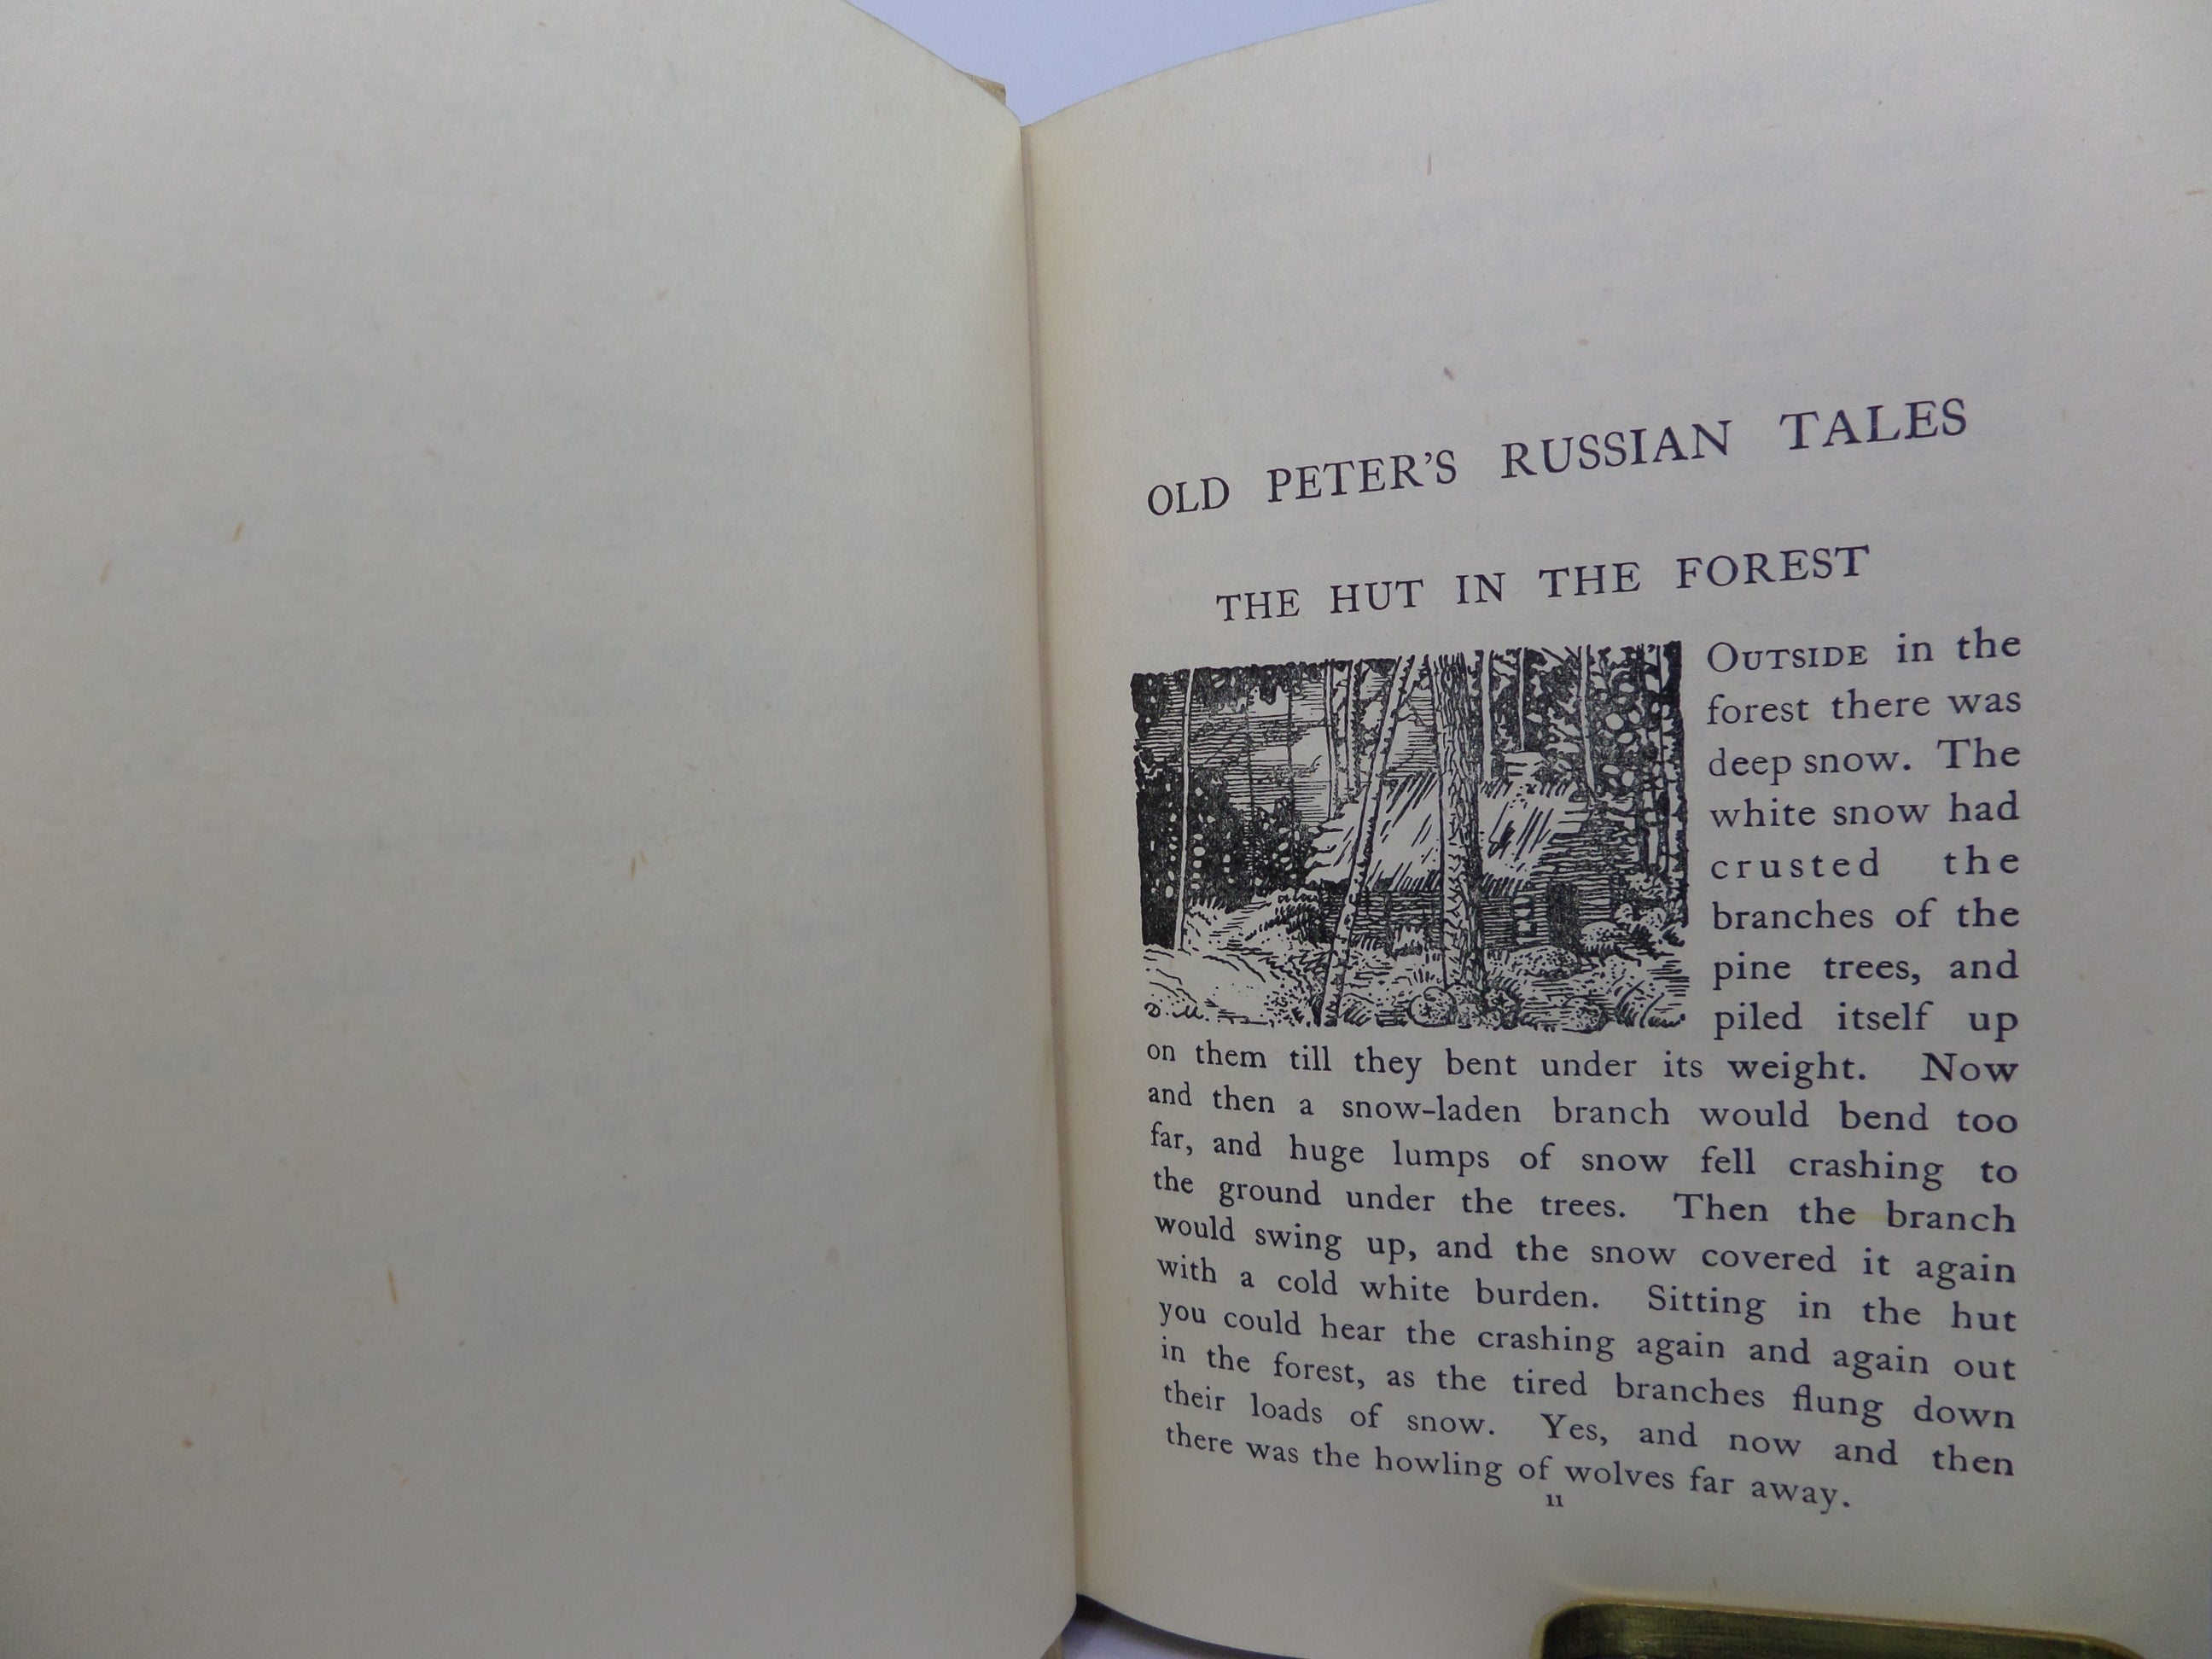 OLD PETER'S RUSSIAN TALES BY ARTHUR RANSOME 1938